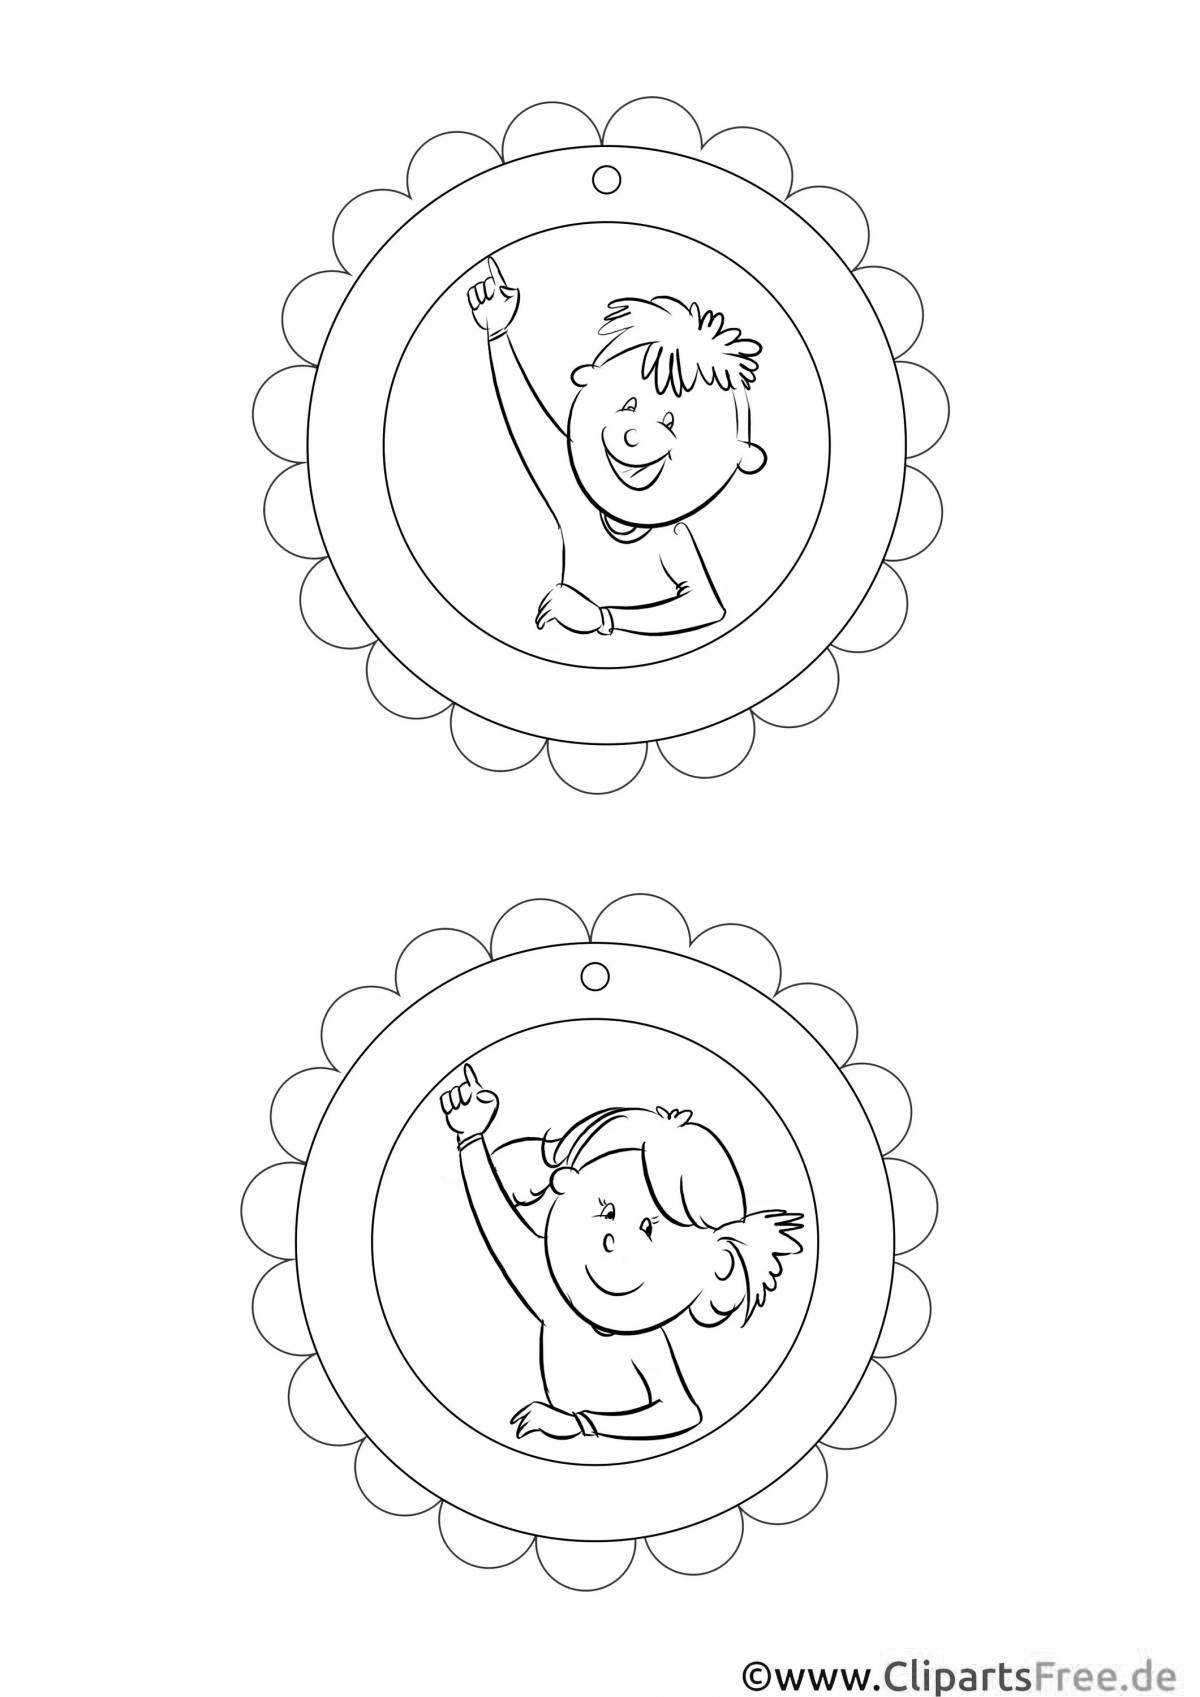 Gorgeous medal pattern coloring page